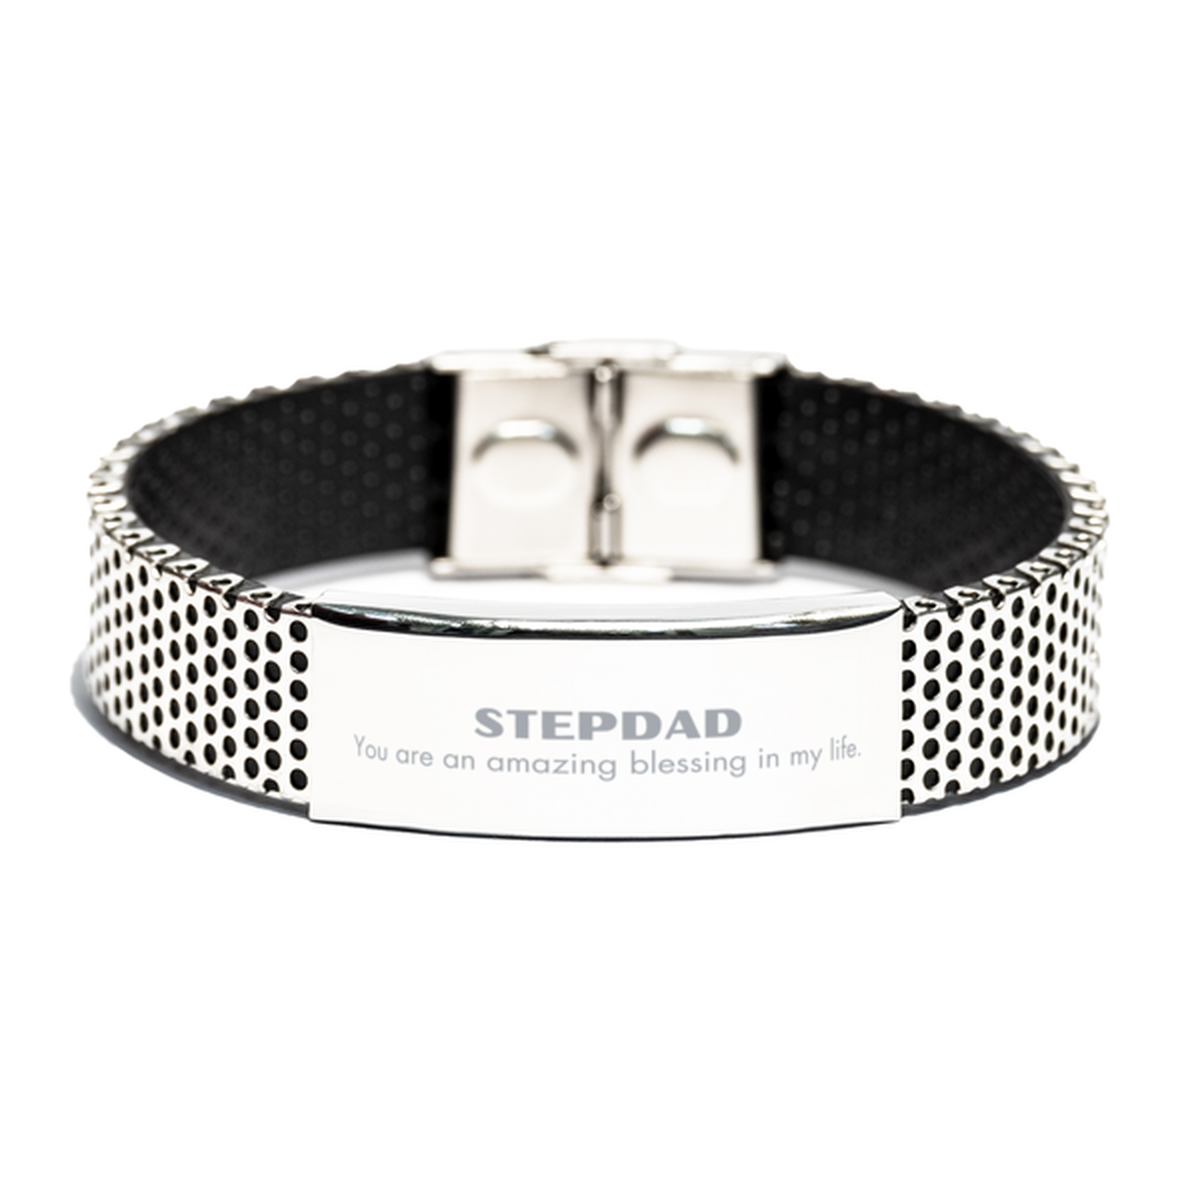 Stepdad Stainless Steel Bracelet, You are an amazing blessing in my life, Thank You Gifts For Stepdad, Inspirational Birthday Christmas Unique Gifts For Stepdad